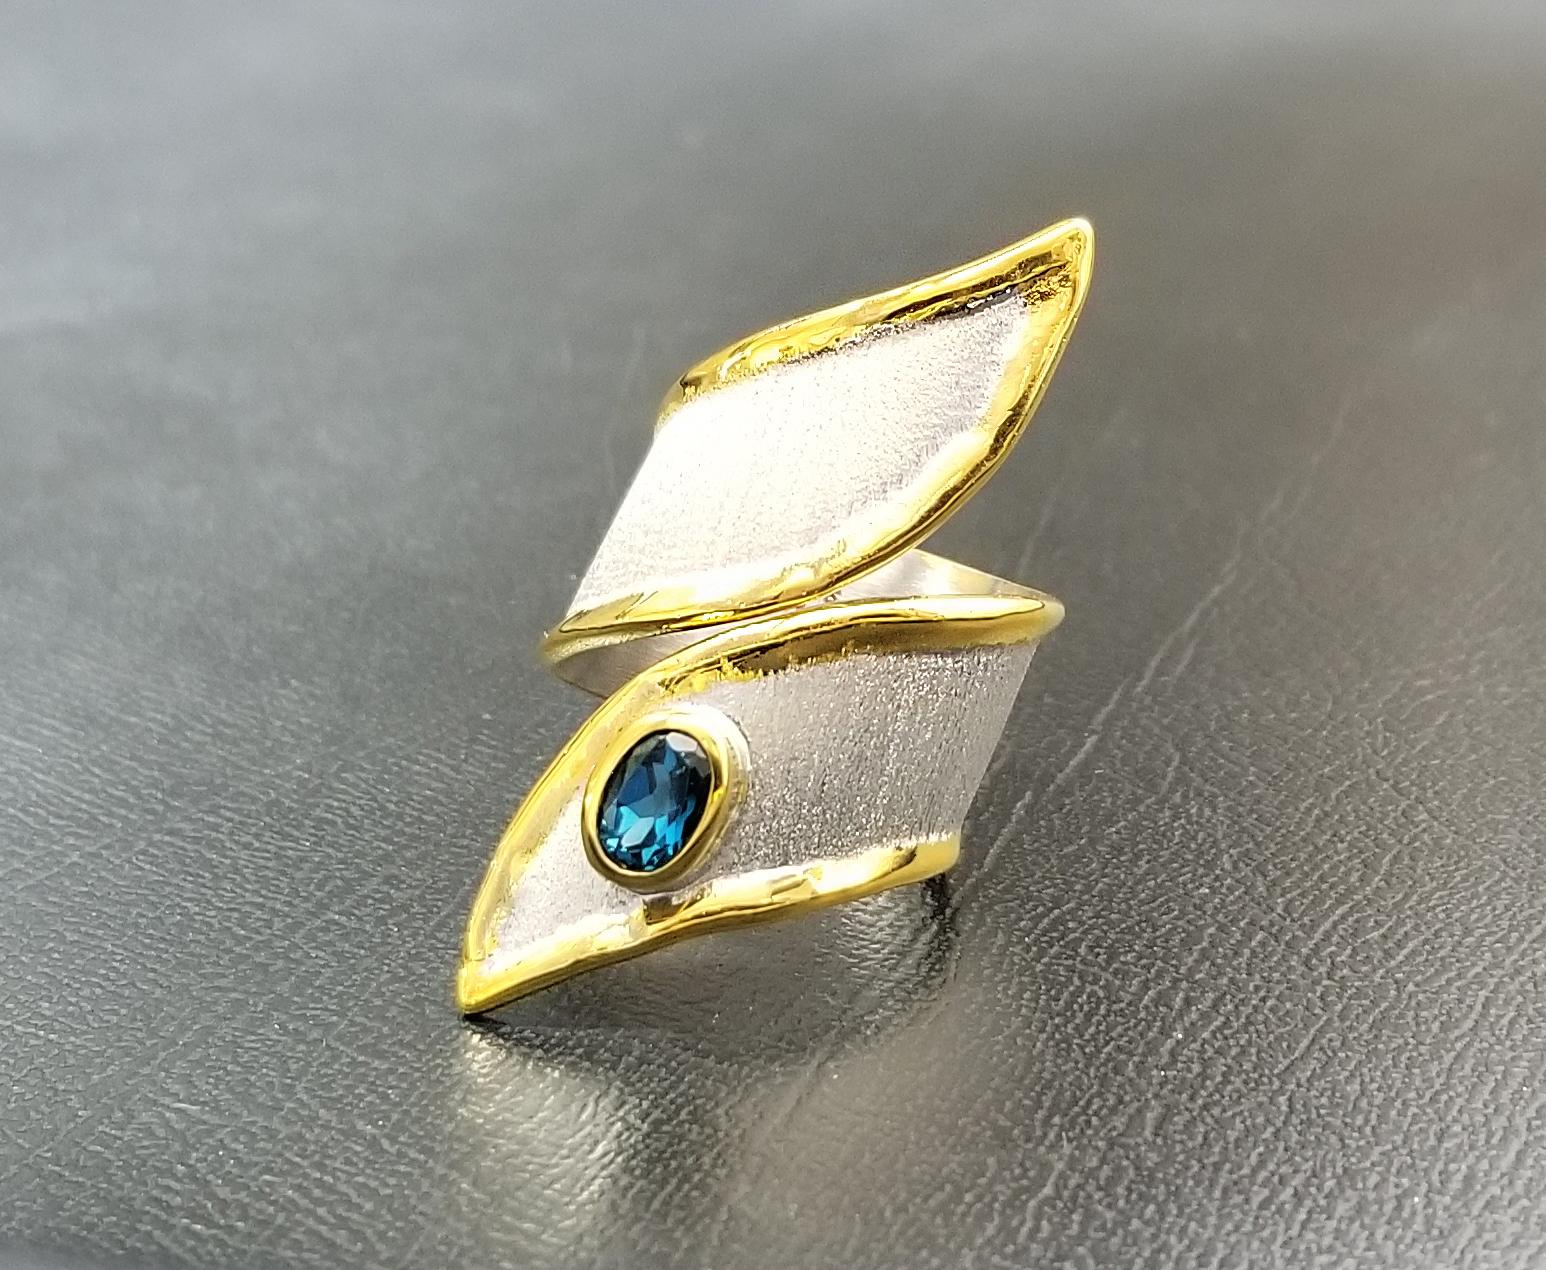 Yianni Creations wide handmade artisan ring from Midas Collection crafted from fine silver 950 purity plated with palladium to resist the elements. Liquid edges are decorated with a thick layer of 24 Karat yellow gold. This gorgeous asymmetric ring